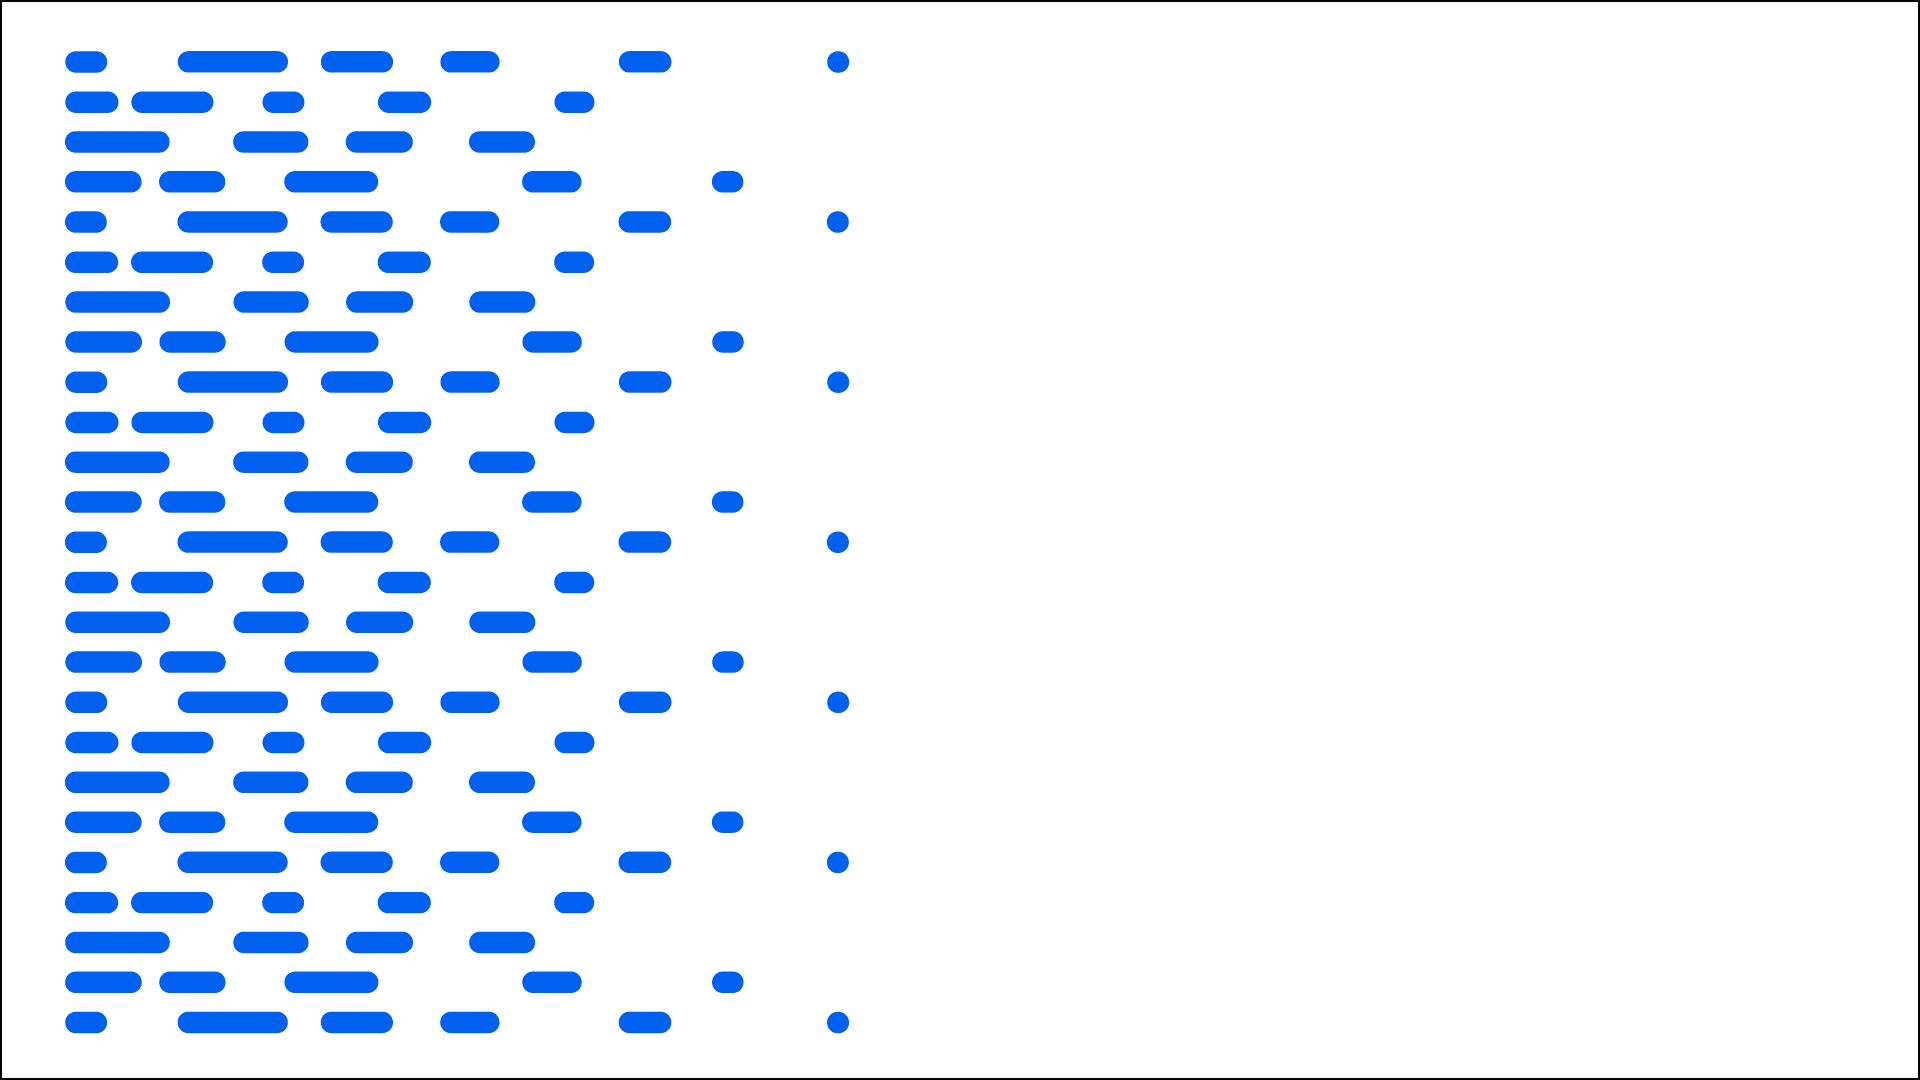 There are closely set horizontal bars of different sizes on one end of the dataflow pattern. When moving towards the other end, the bars become sparser and turn into dots before the other end. The bars in the image are electric blue.